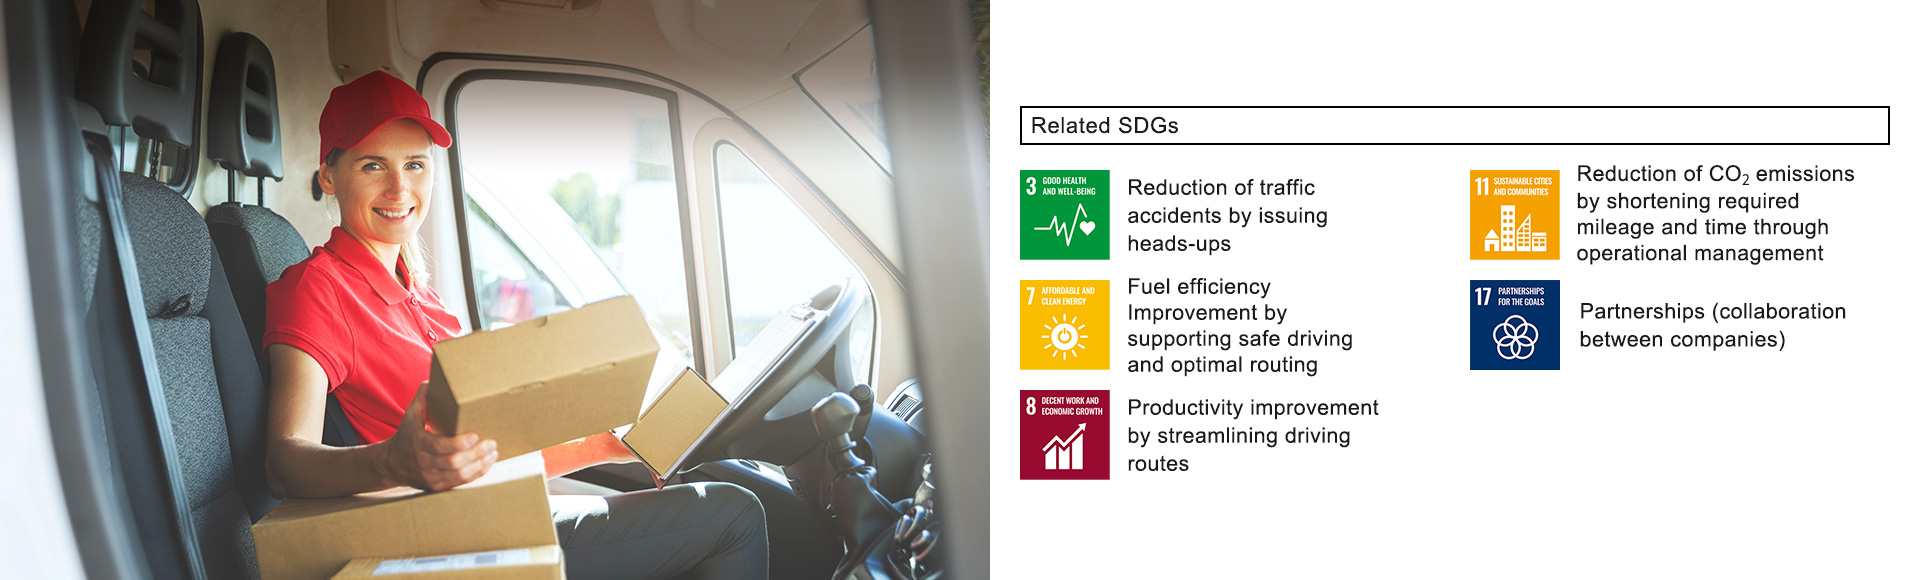 Related SDGs 3 Good health and well-being: Reduction of traffic accidents by issuing heads-ups, 7 Affordable and clean energy: Fuel efficiency Improvement by supporting safe driving and optimal routing, 8 Decent work and economic growth: Productivity improvement
by streamlining driving routes, 11 Sustainable cities and communities: Reduction of CO2 emissions by shortening required mileage and time through operational management, 17 Partnership for the goals: Partnerships (collaboration between companies)